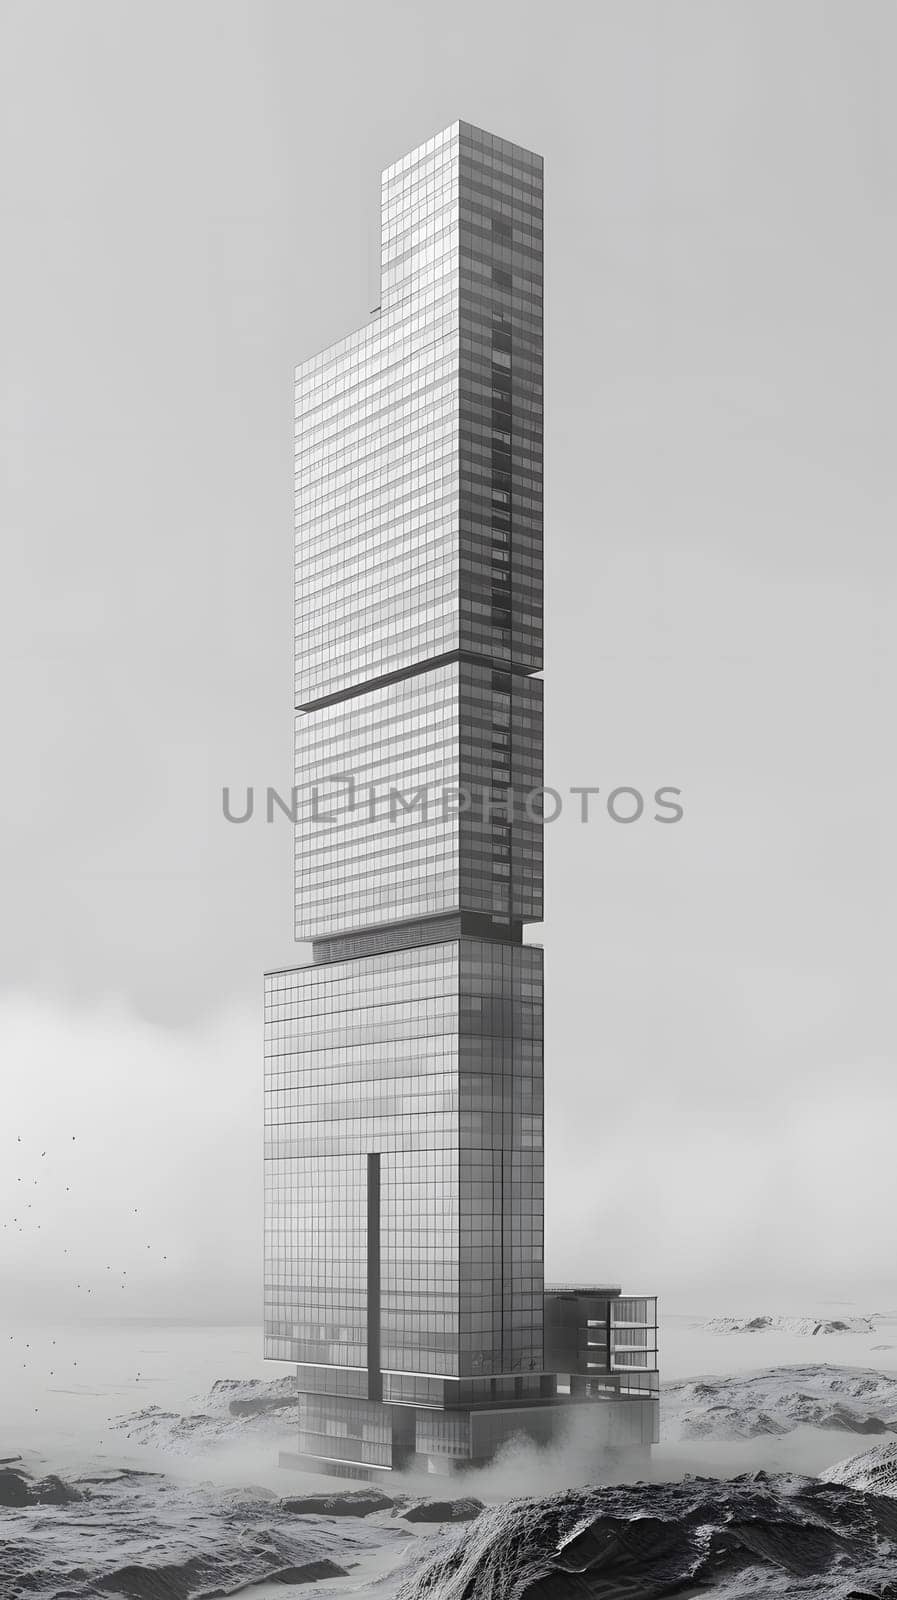 A striking black and white photo of a skyscraper standing tall in the middle of the ocean, surrounded by water and under a clear sky